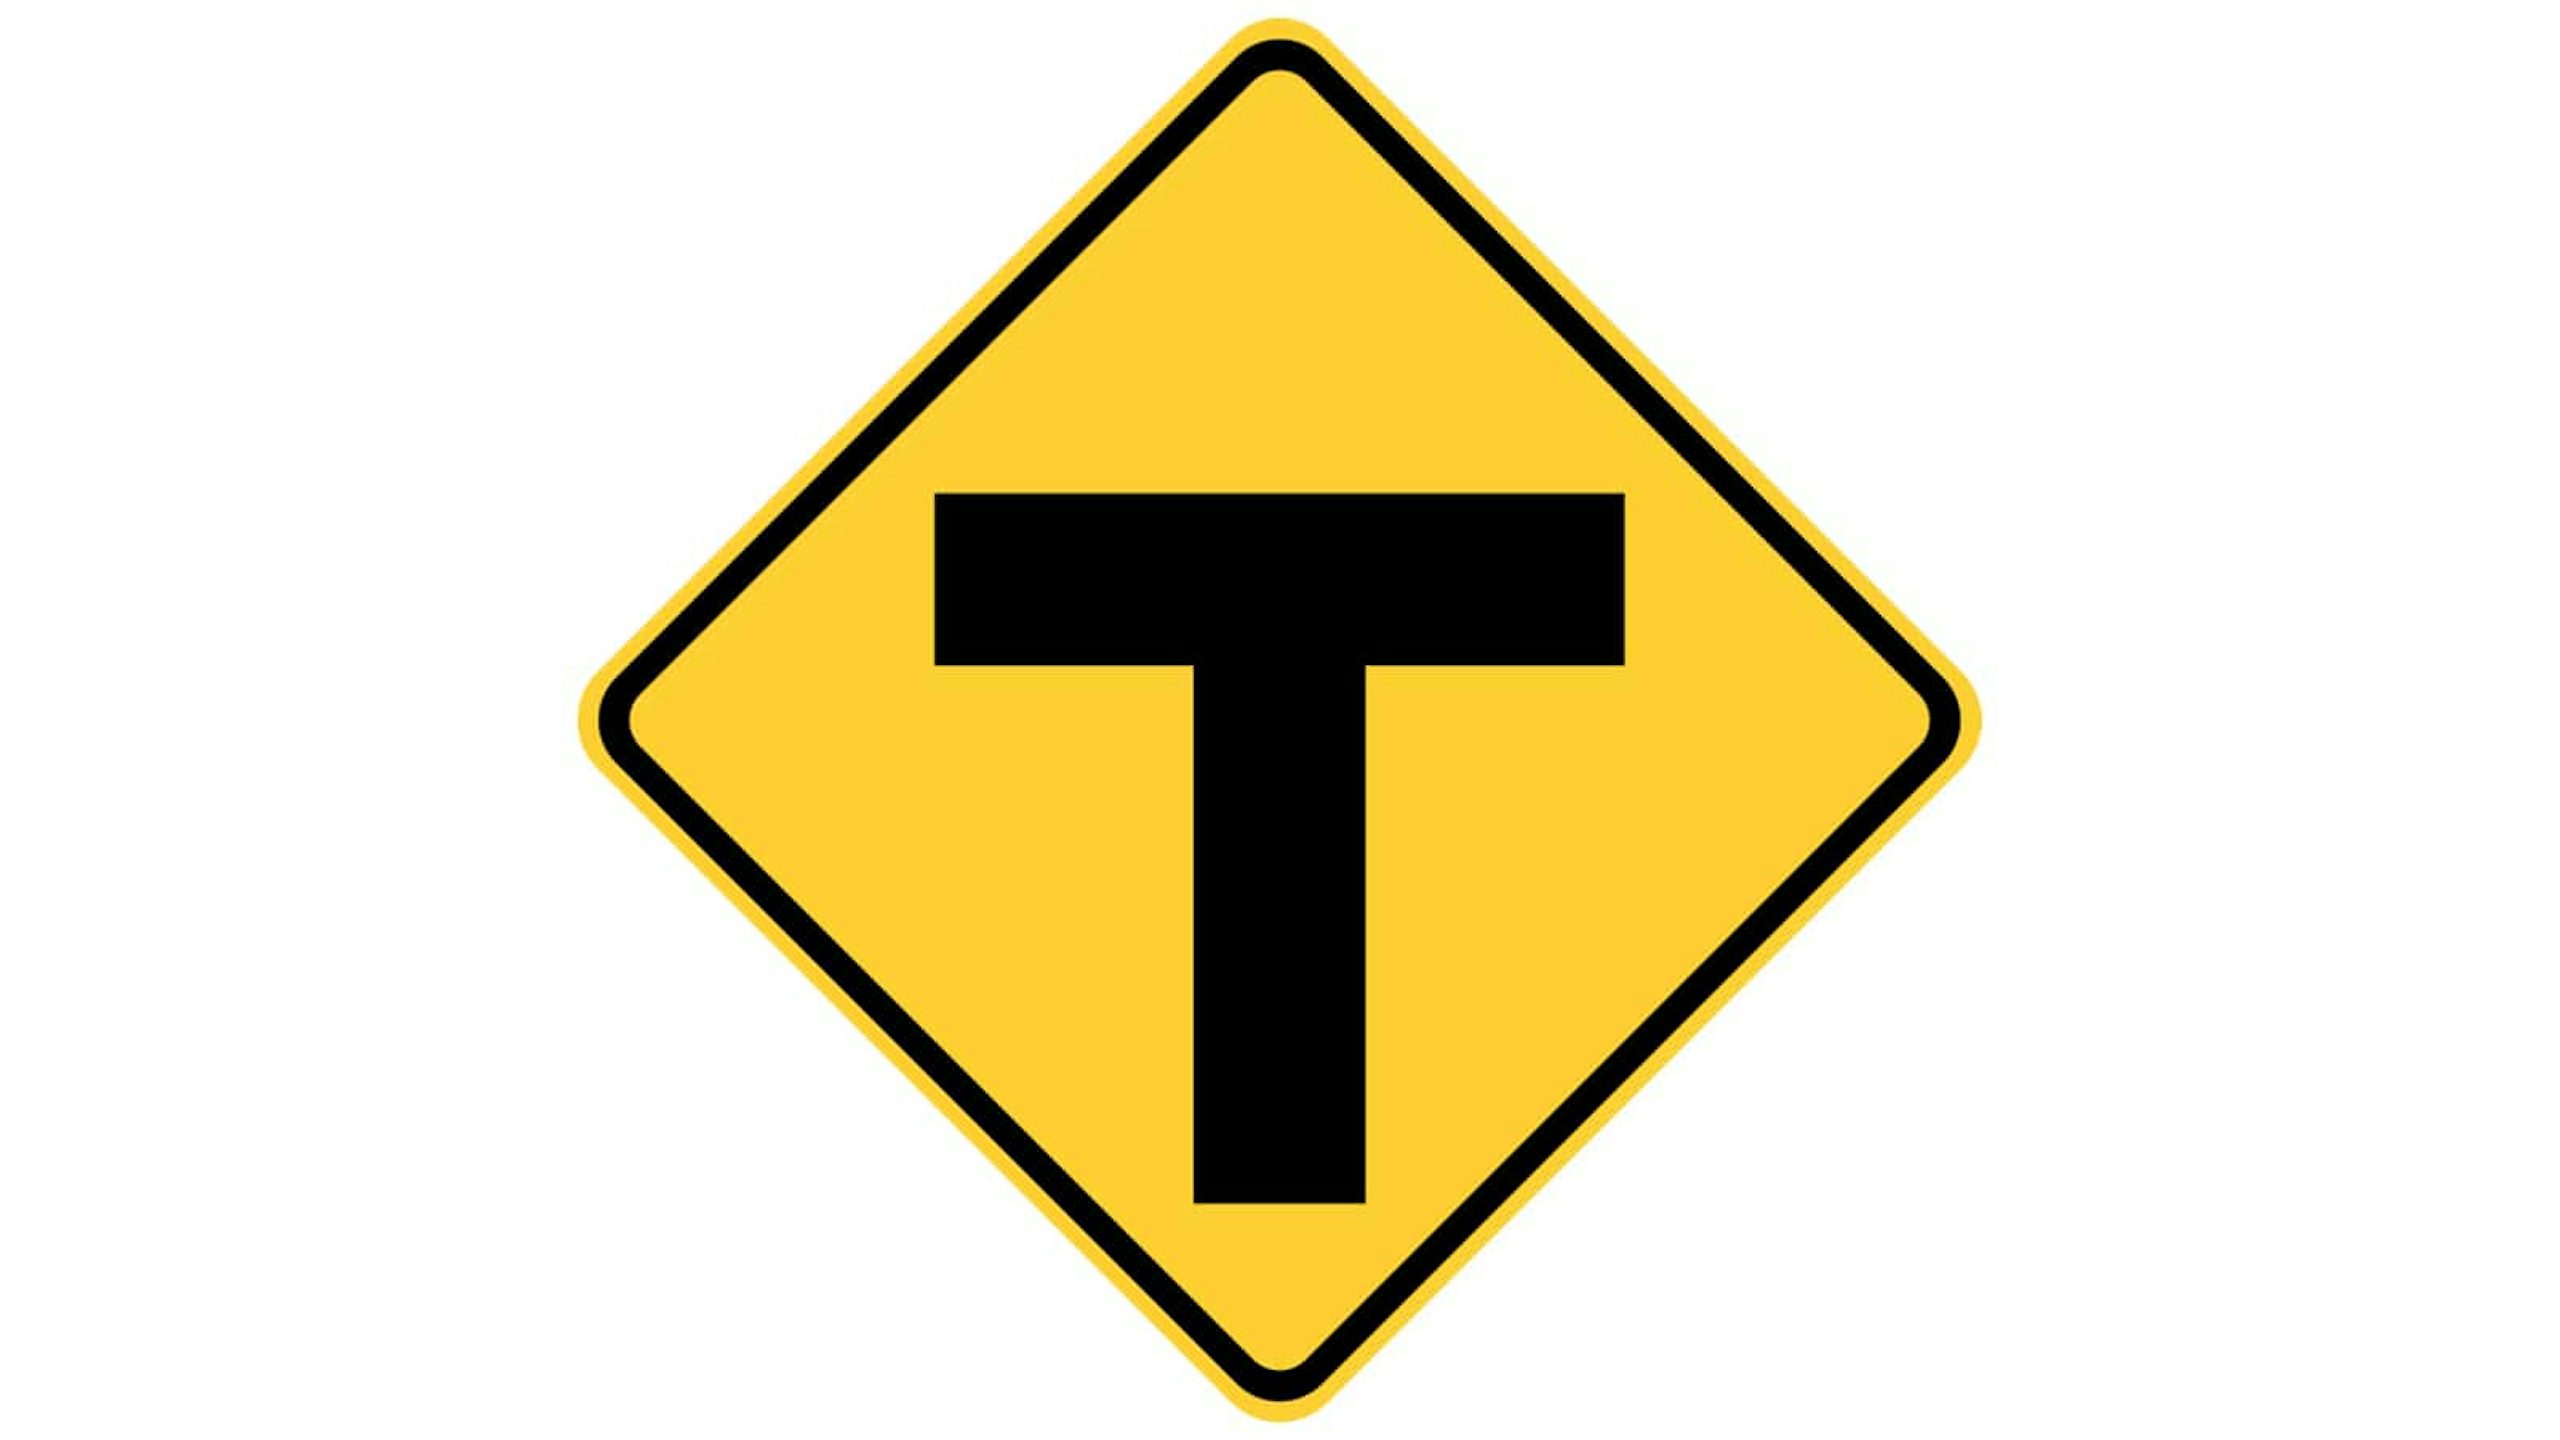 Warning sign T-Roads